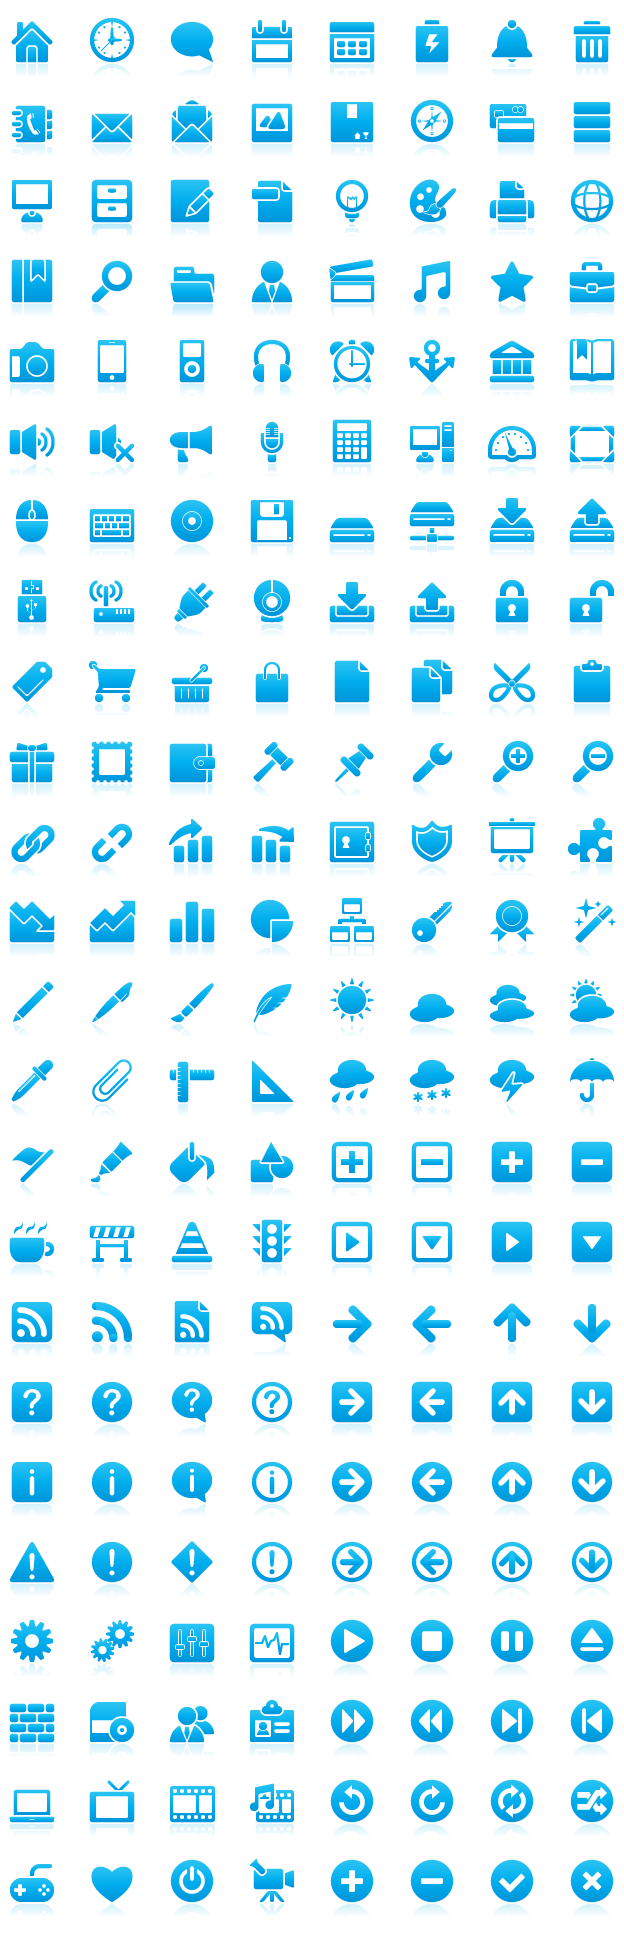 Clouds Blue Silhouette Icon, PNG ClipArt Image | IconBug.com